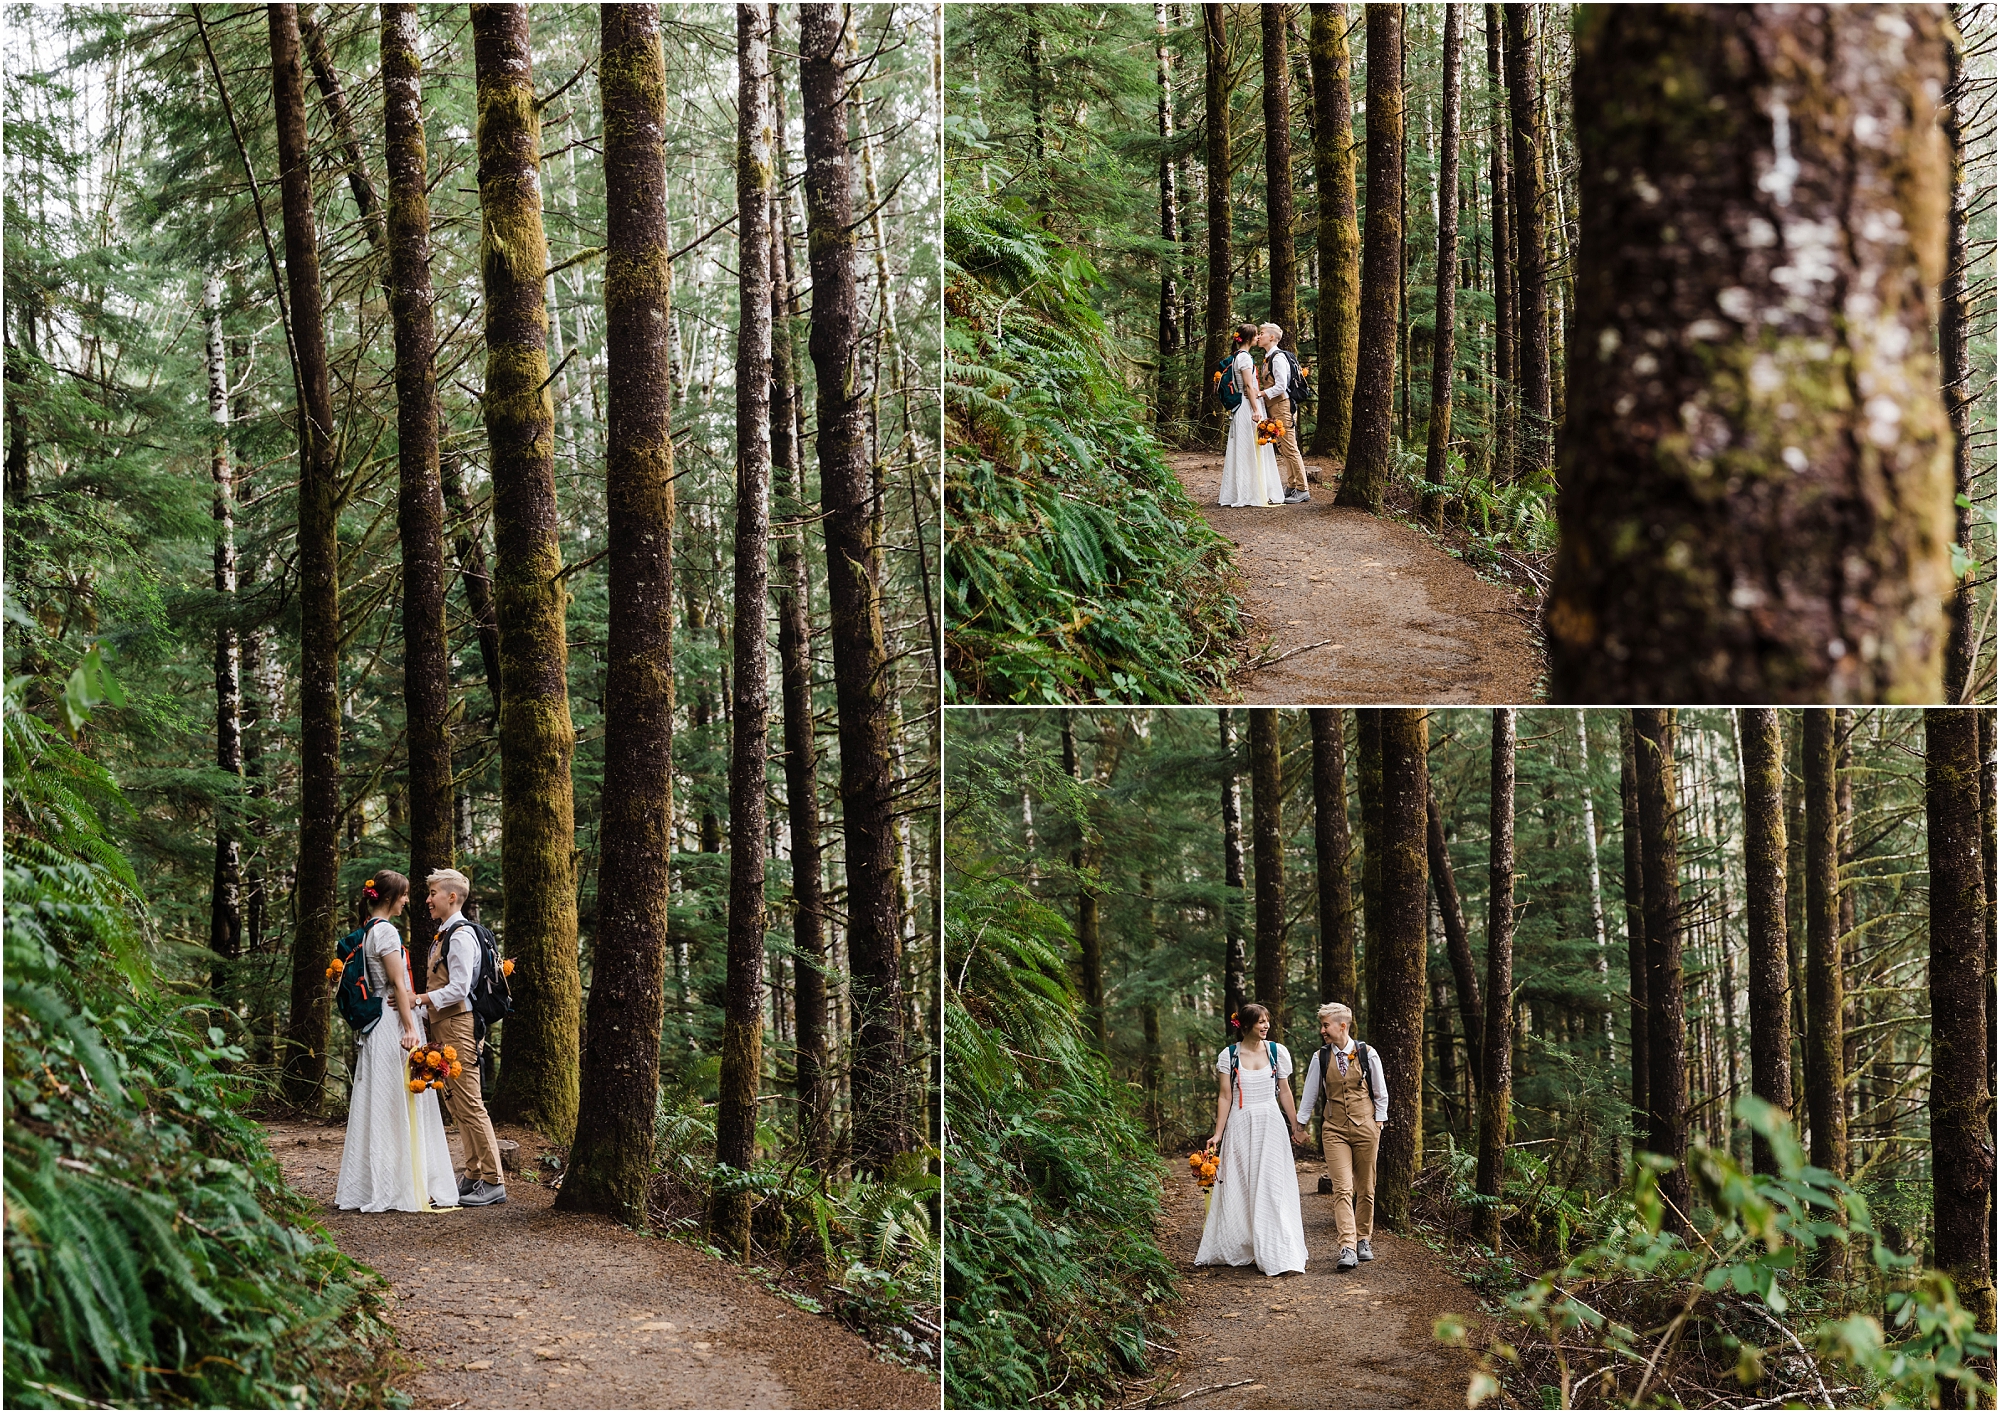 A couple hikes a lush spruce forest trail in their wedding attire for their PNW hiking adventure elopement in Oregon. | Erica Swantek Photography